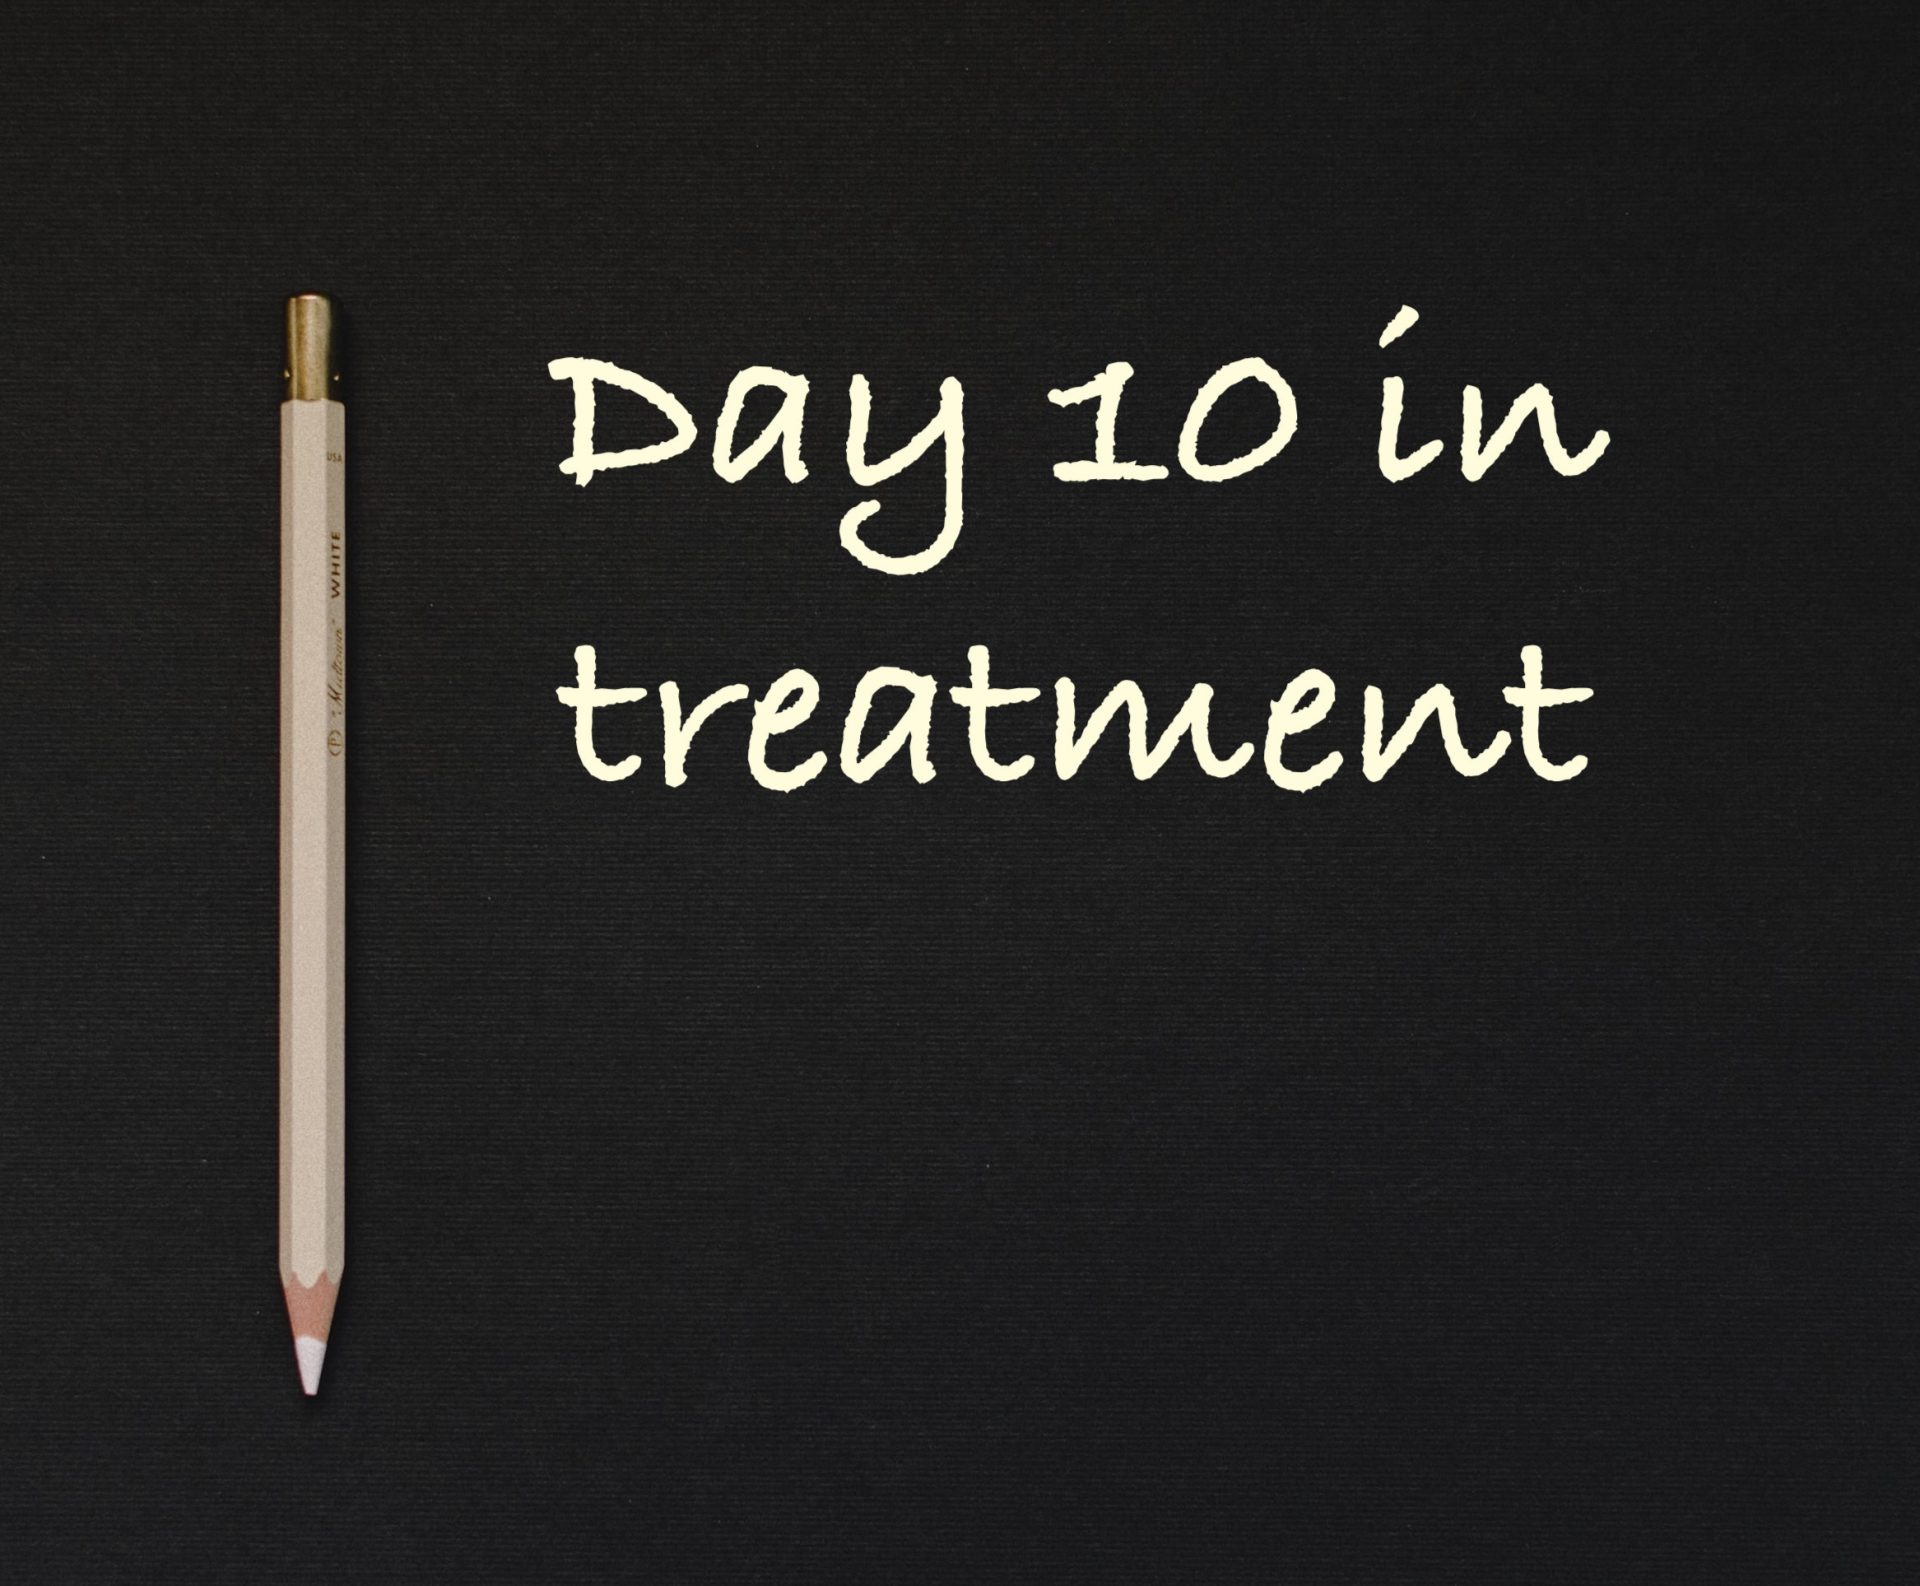 Day 10 in treatment